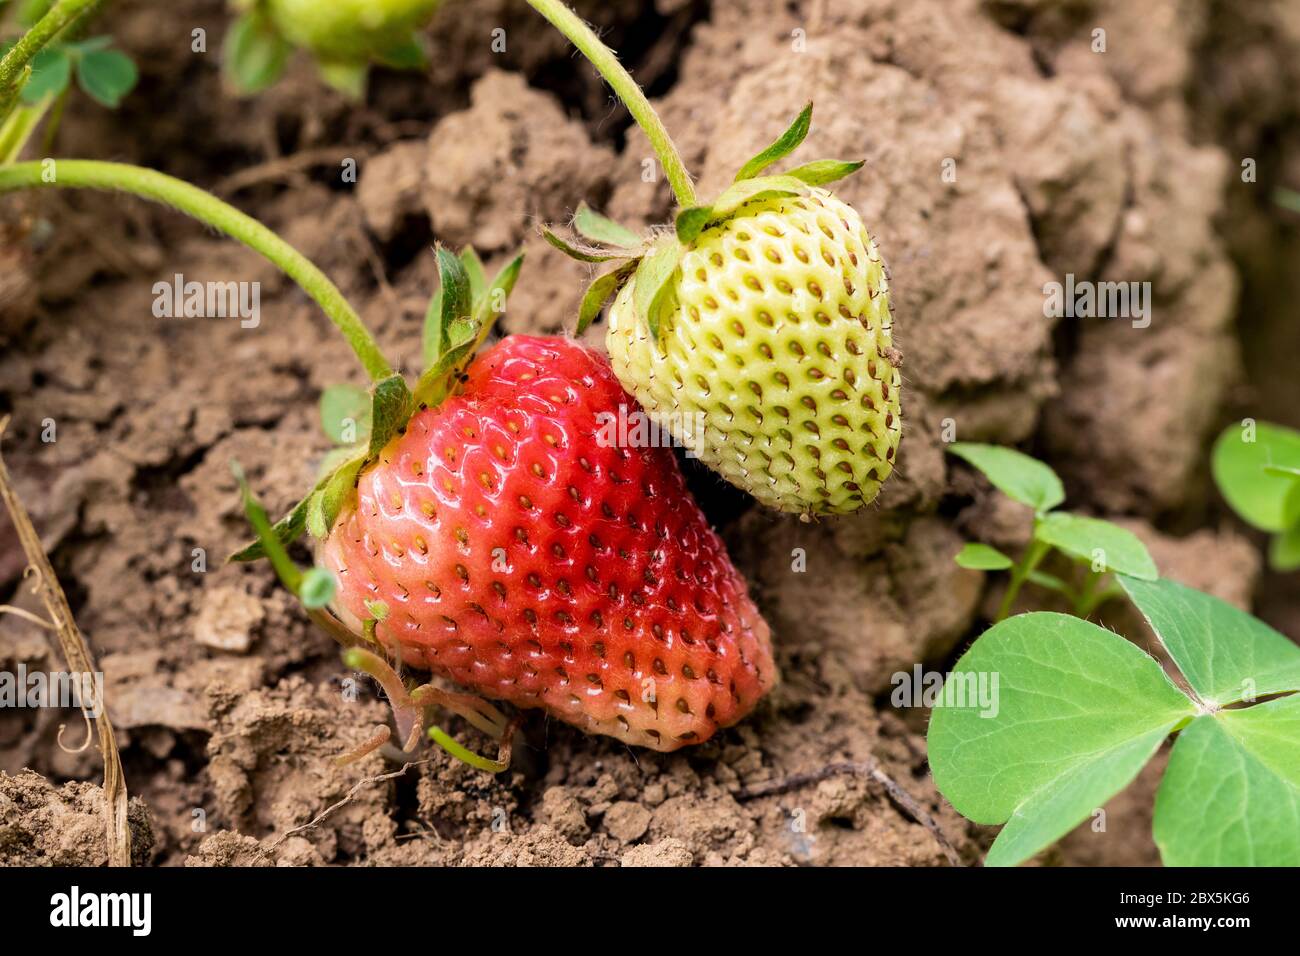 Selective focus of wild strawberries in different stages of ripening, green and red. Spain Stock Photo